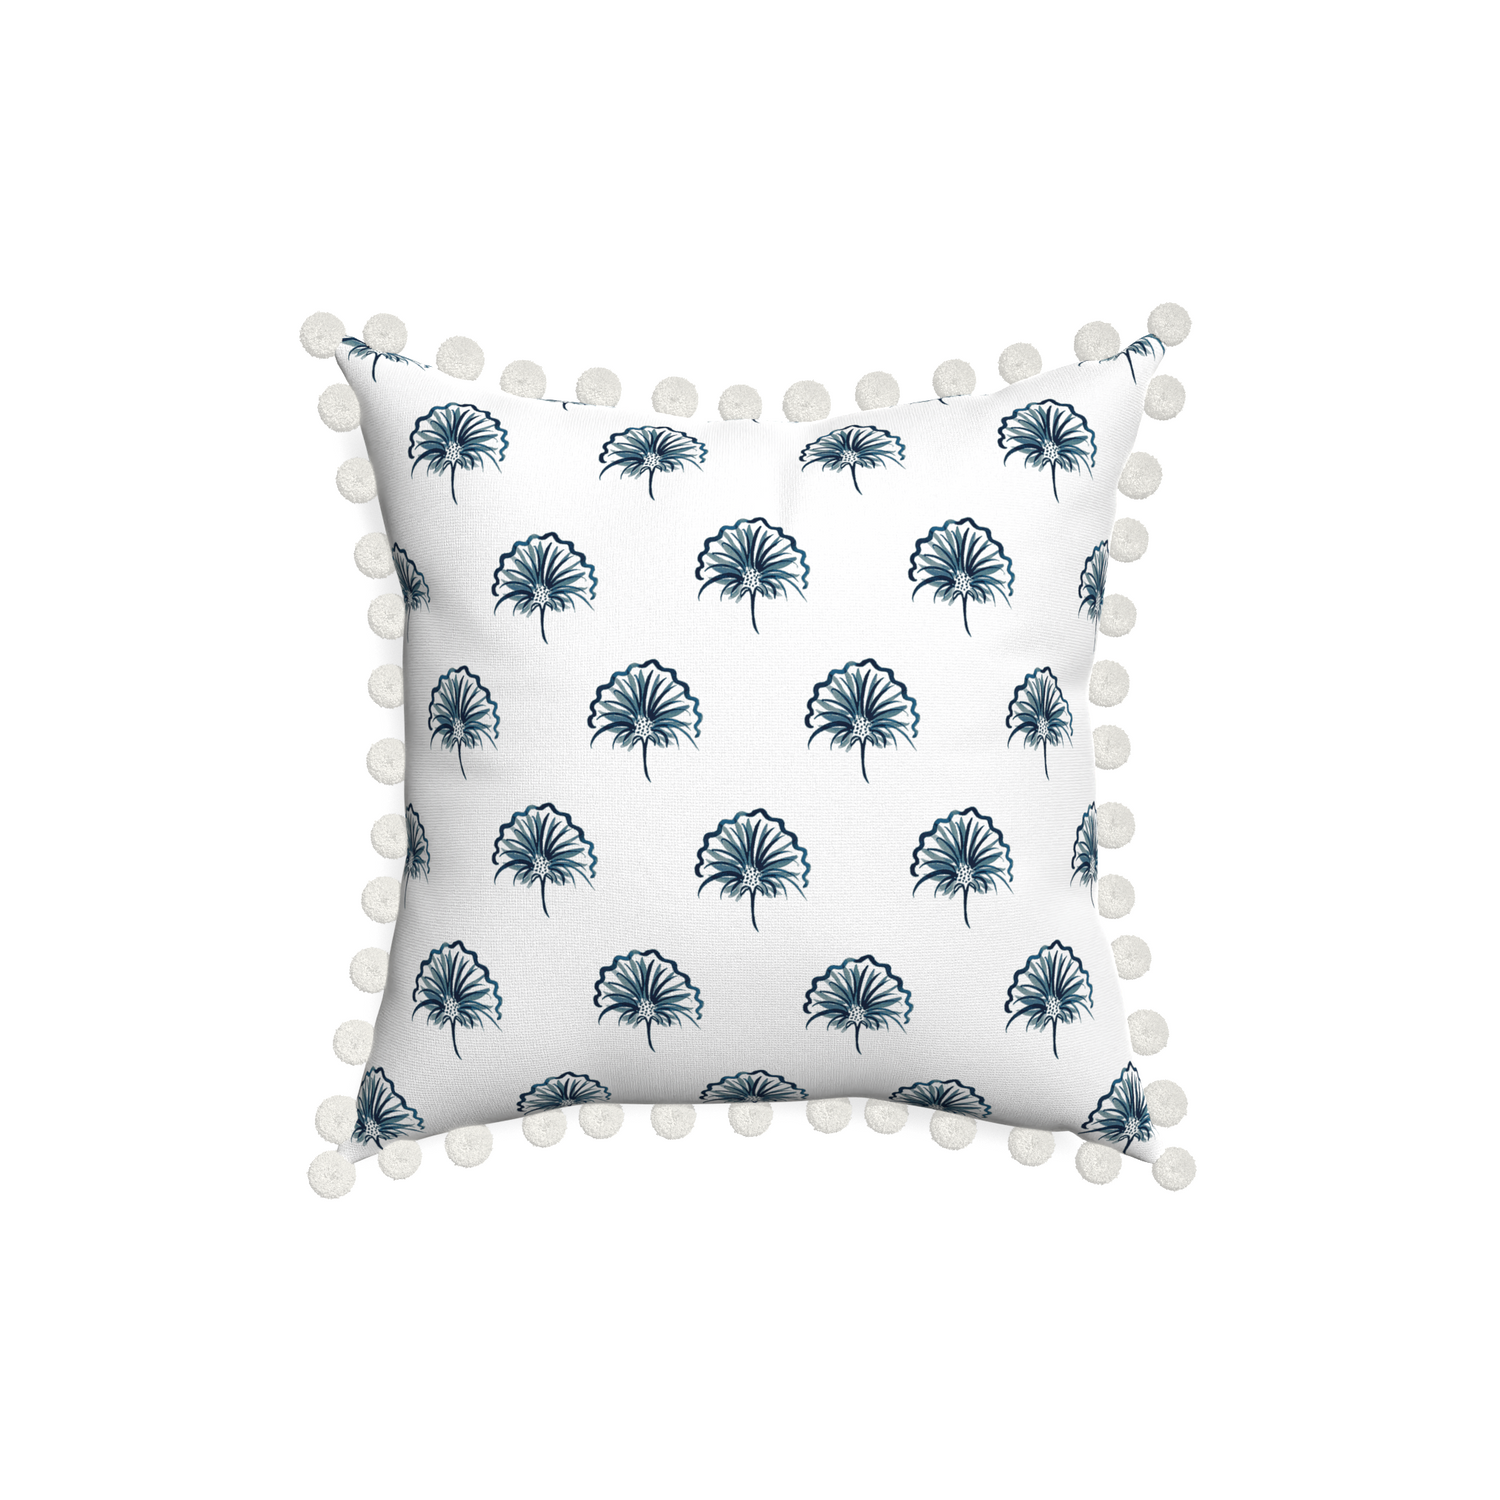 18-square penelope midnight custom pillow with snow pom pom on white background